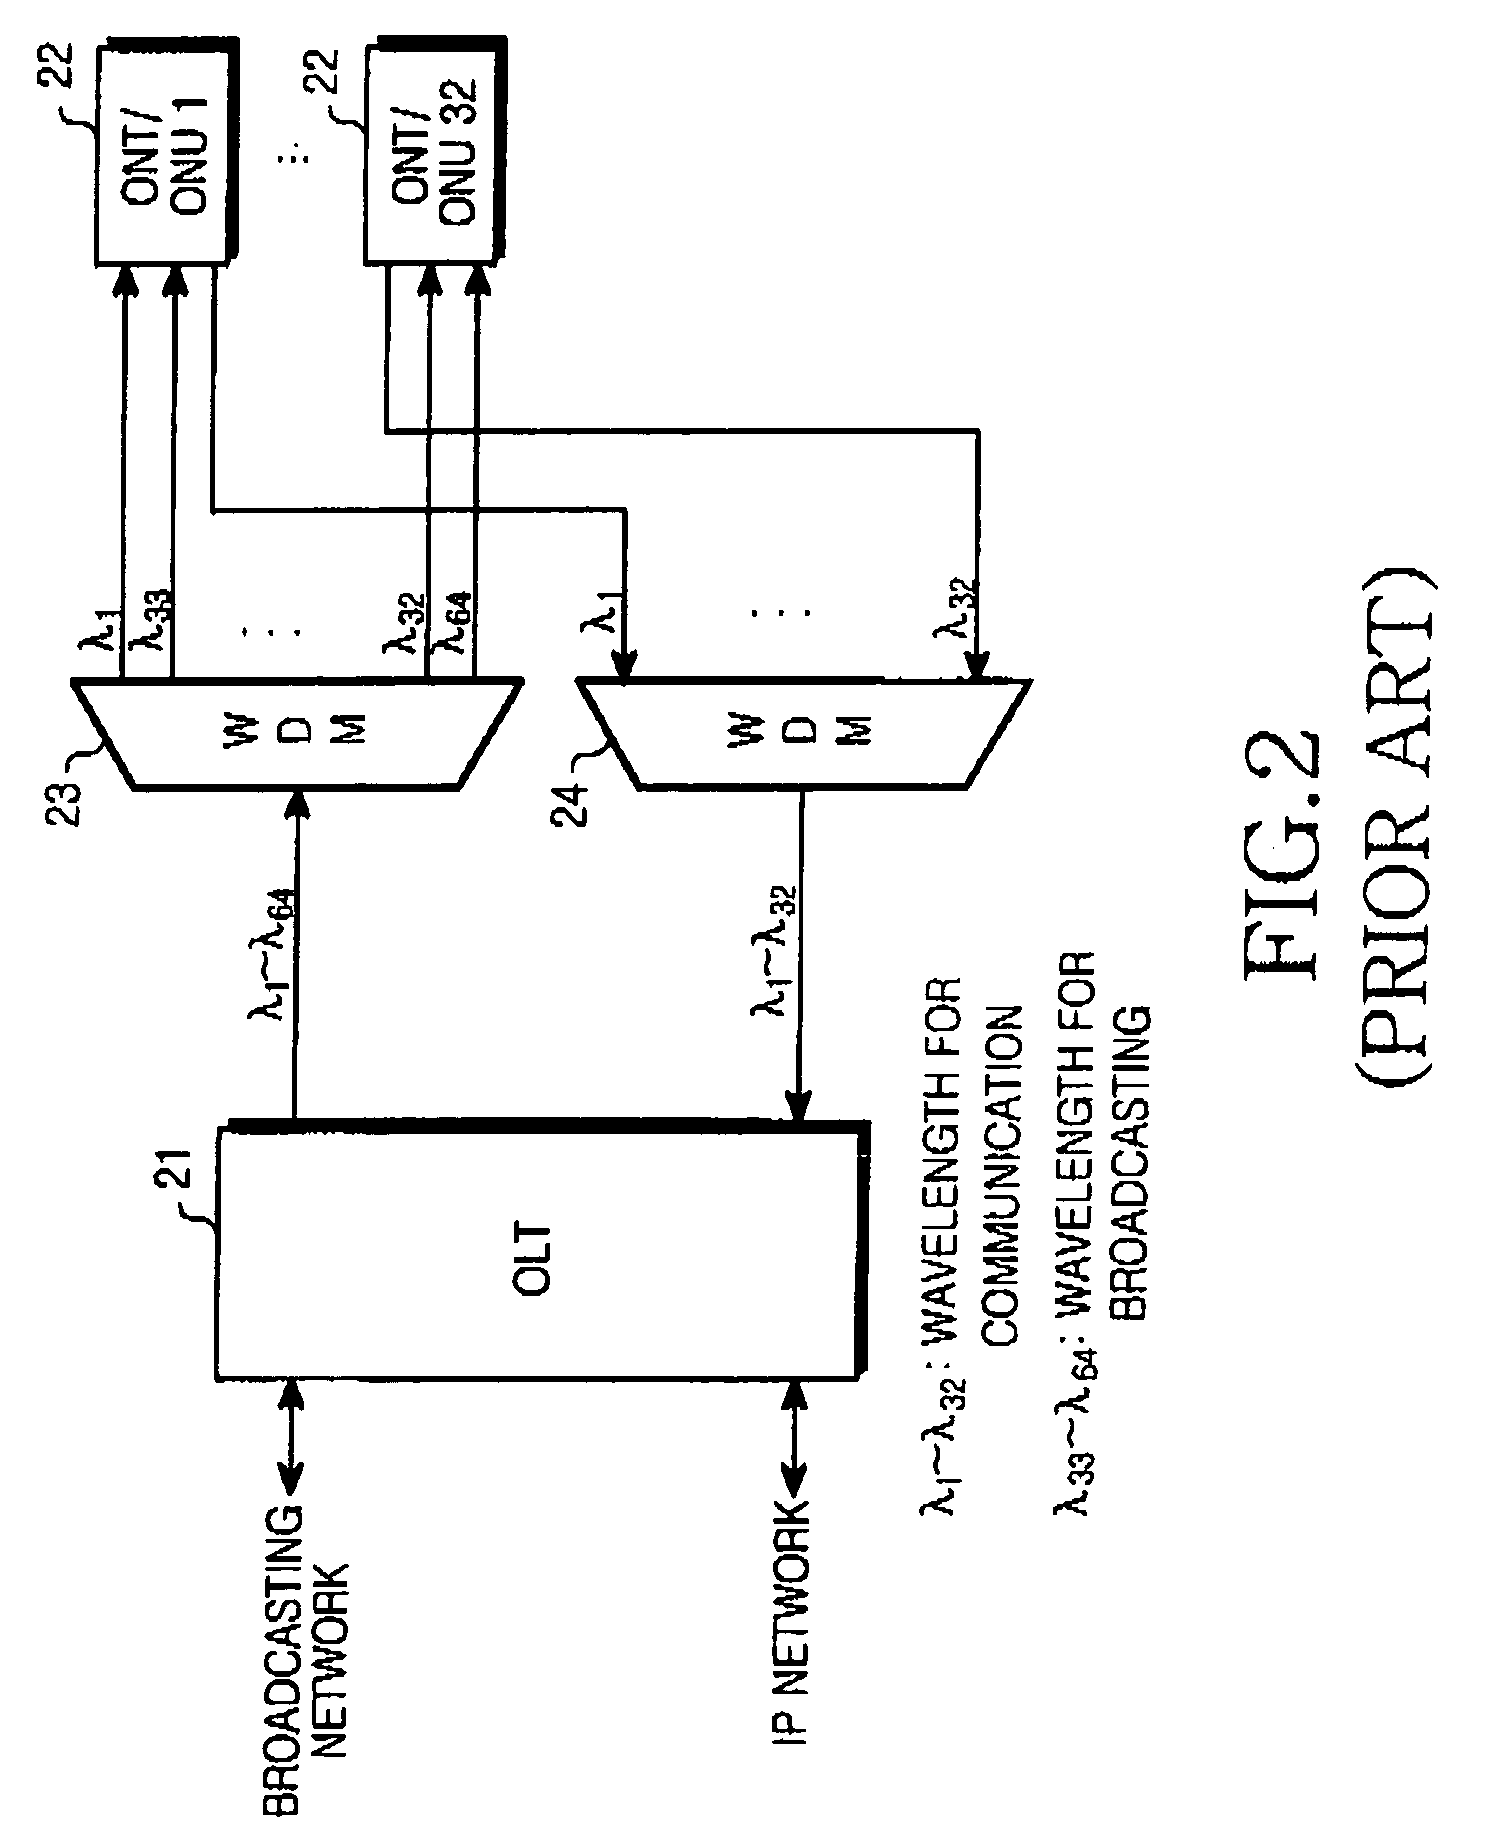 Communication/broadcast multiplexer and demultiplexer used in communication/broadcast-integrated system